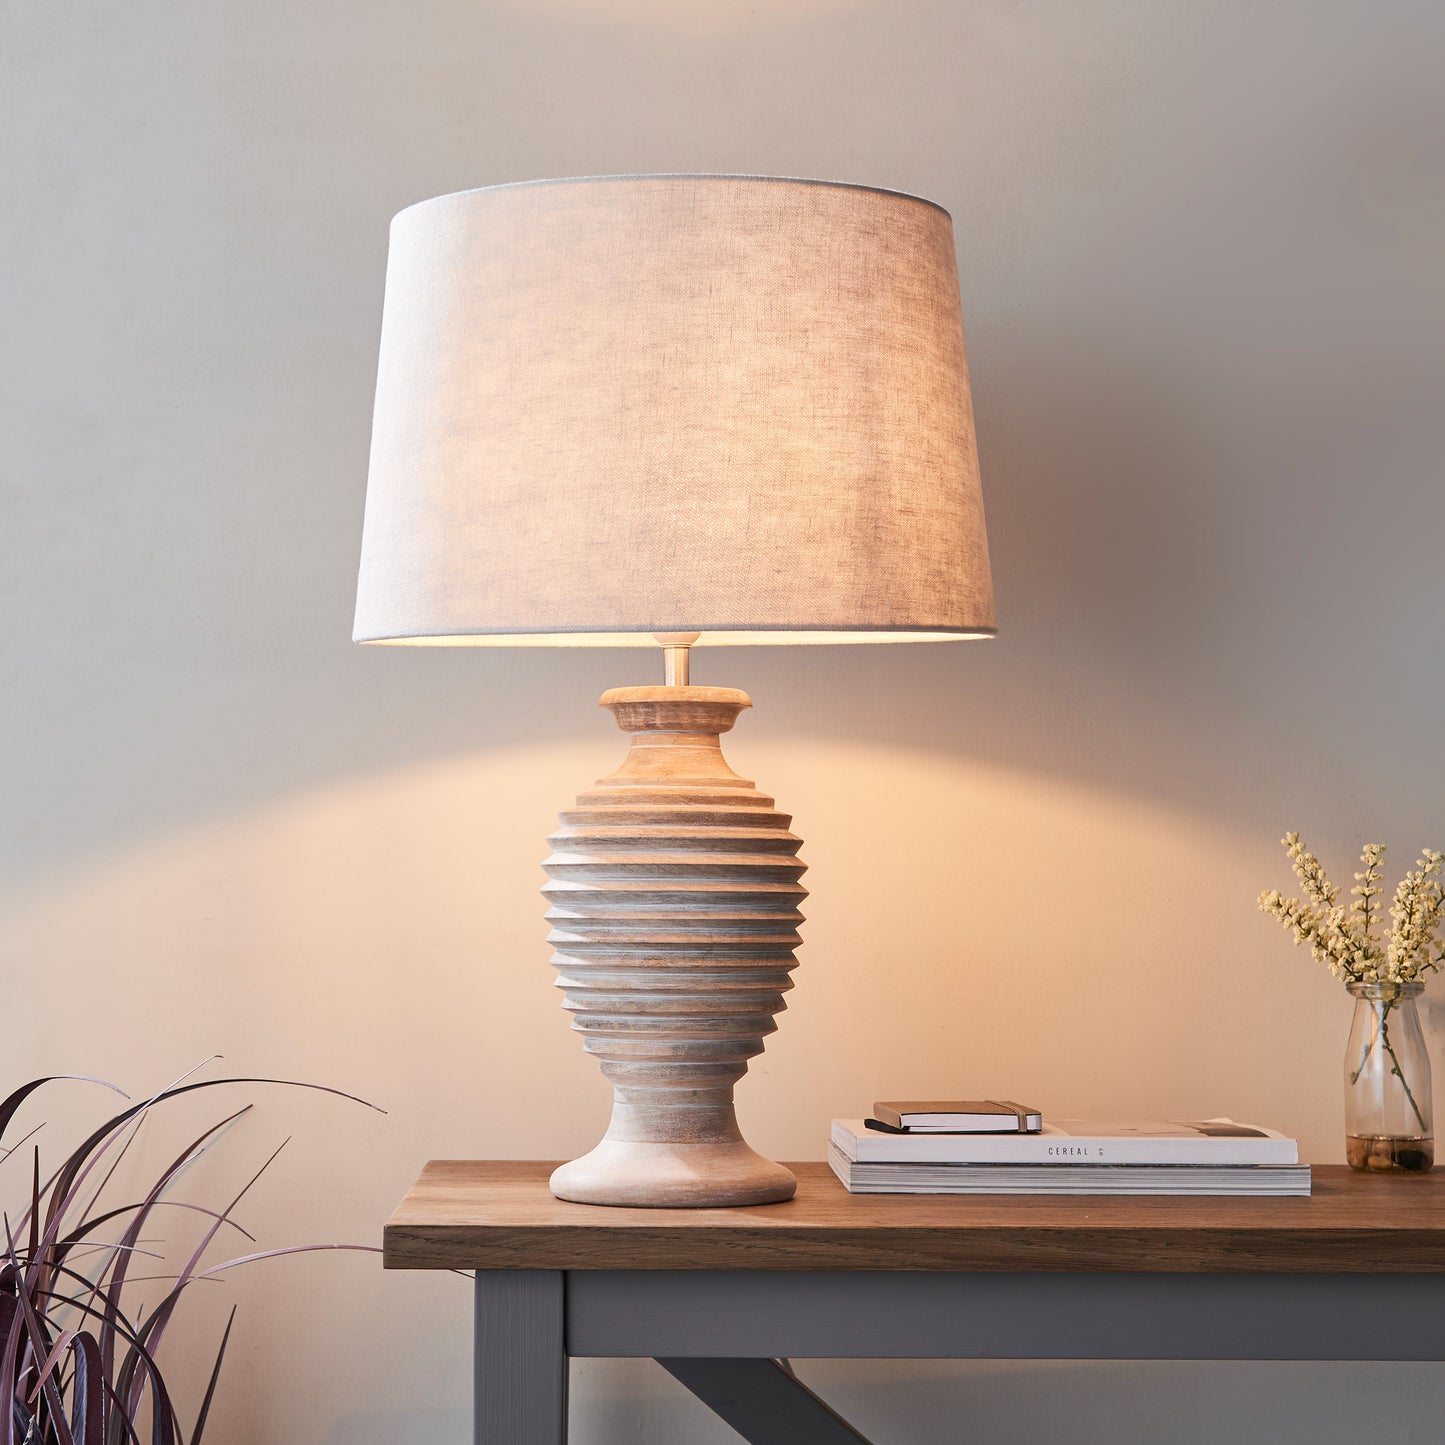 A Sagara 1 Table Light by Kikiathome.co.uk, an interior decor piece, placed on a table next to a plant.